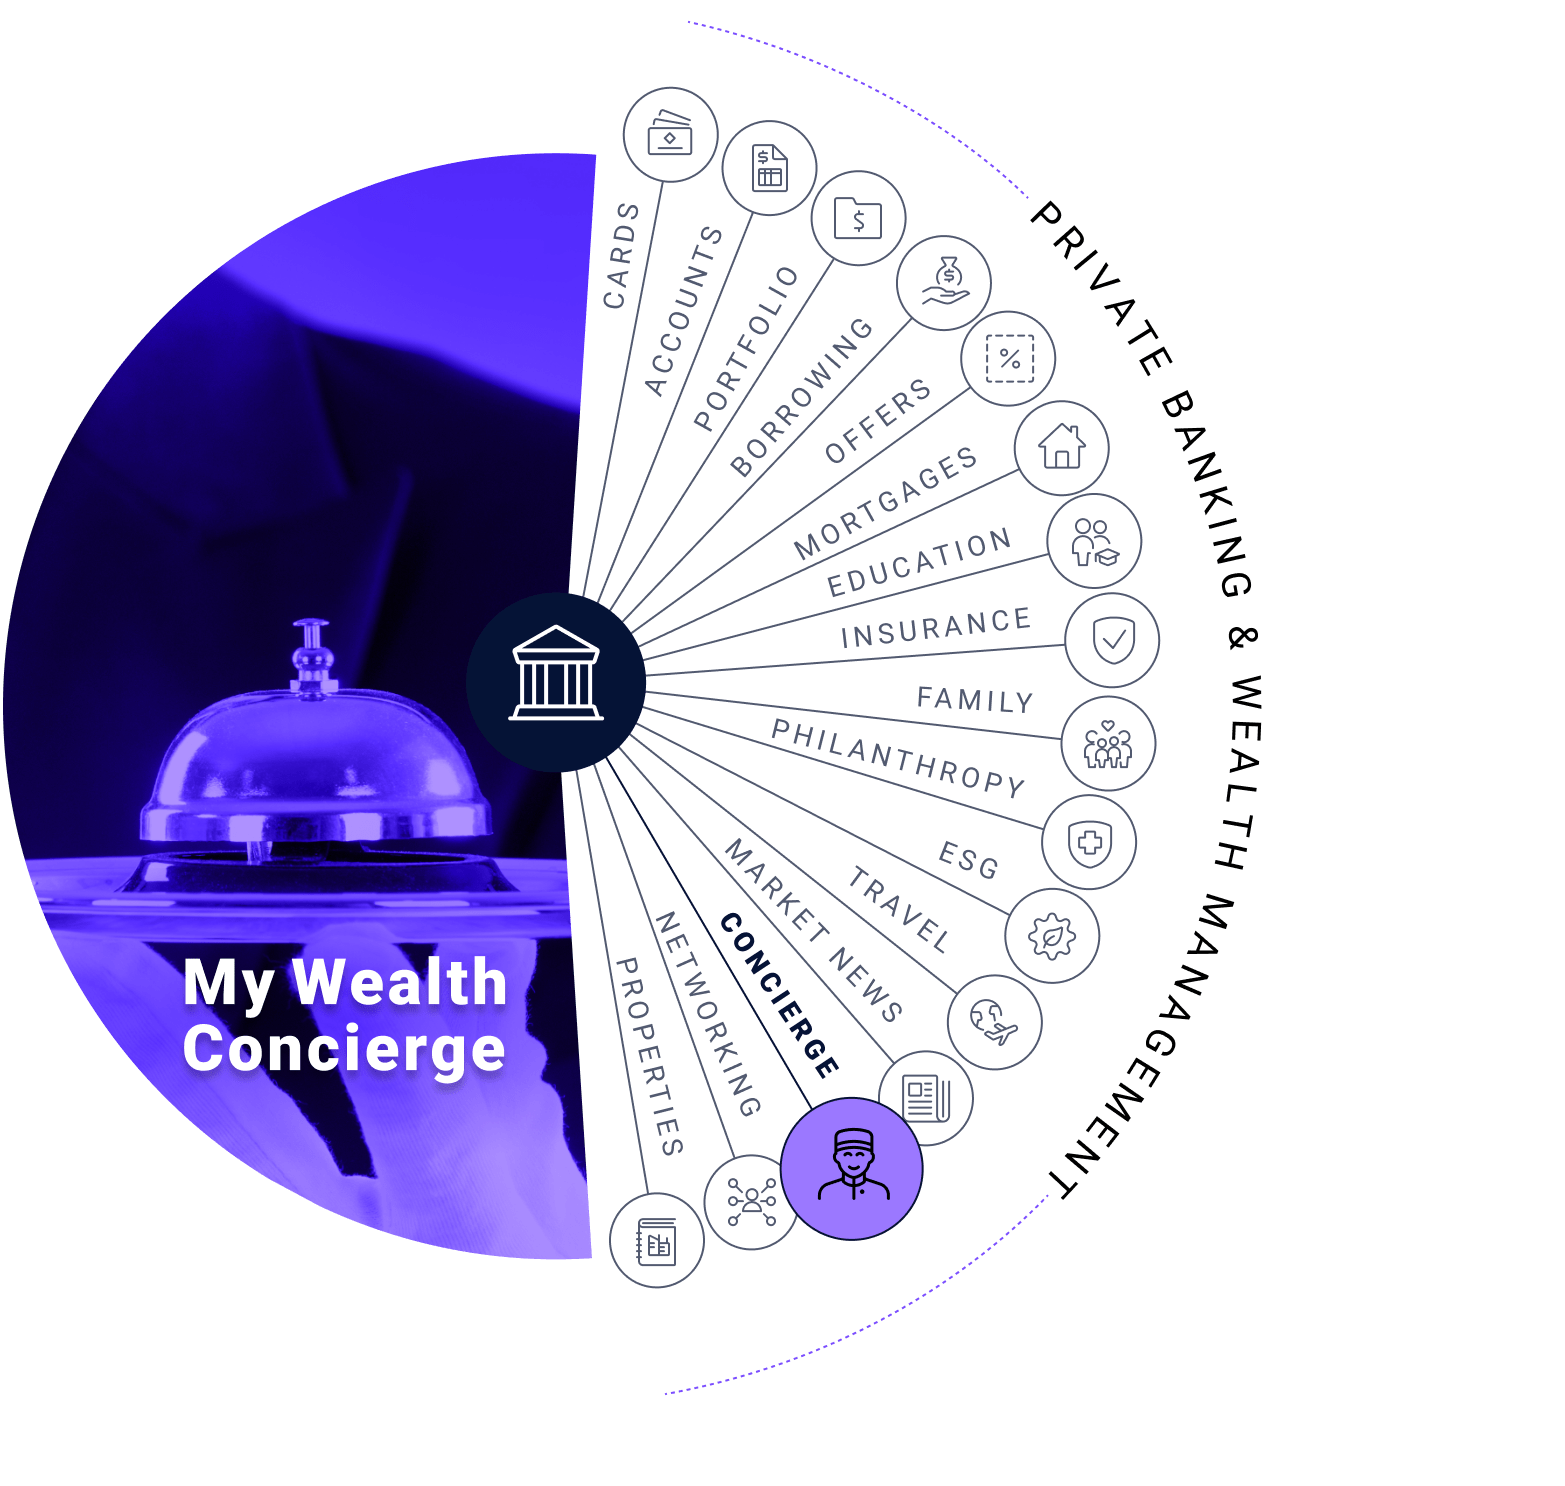 My Wealth Concierge: cards, accounts, portfolio, borrowing, offers, mortgages, education, insurance, family, philanthropy, esg, travel, market news, concierge, networking, and properties